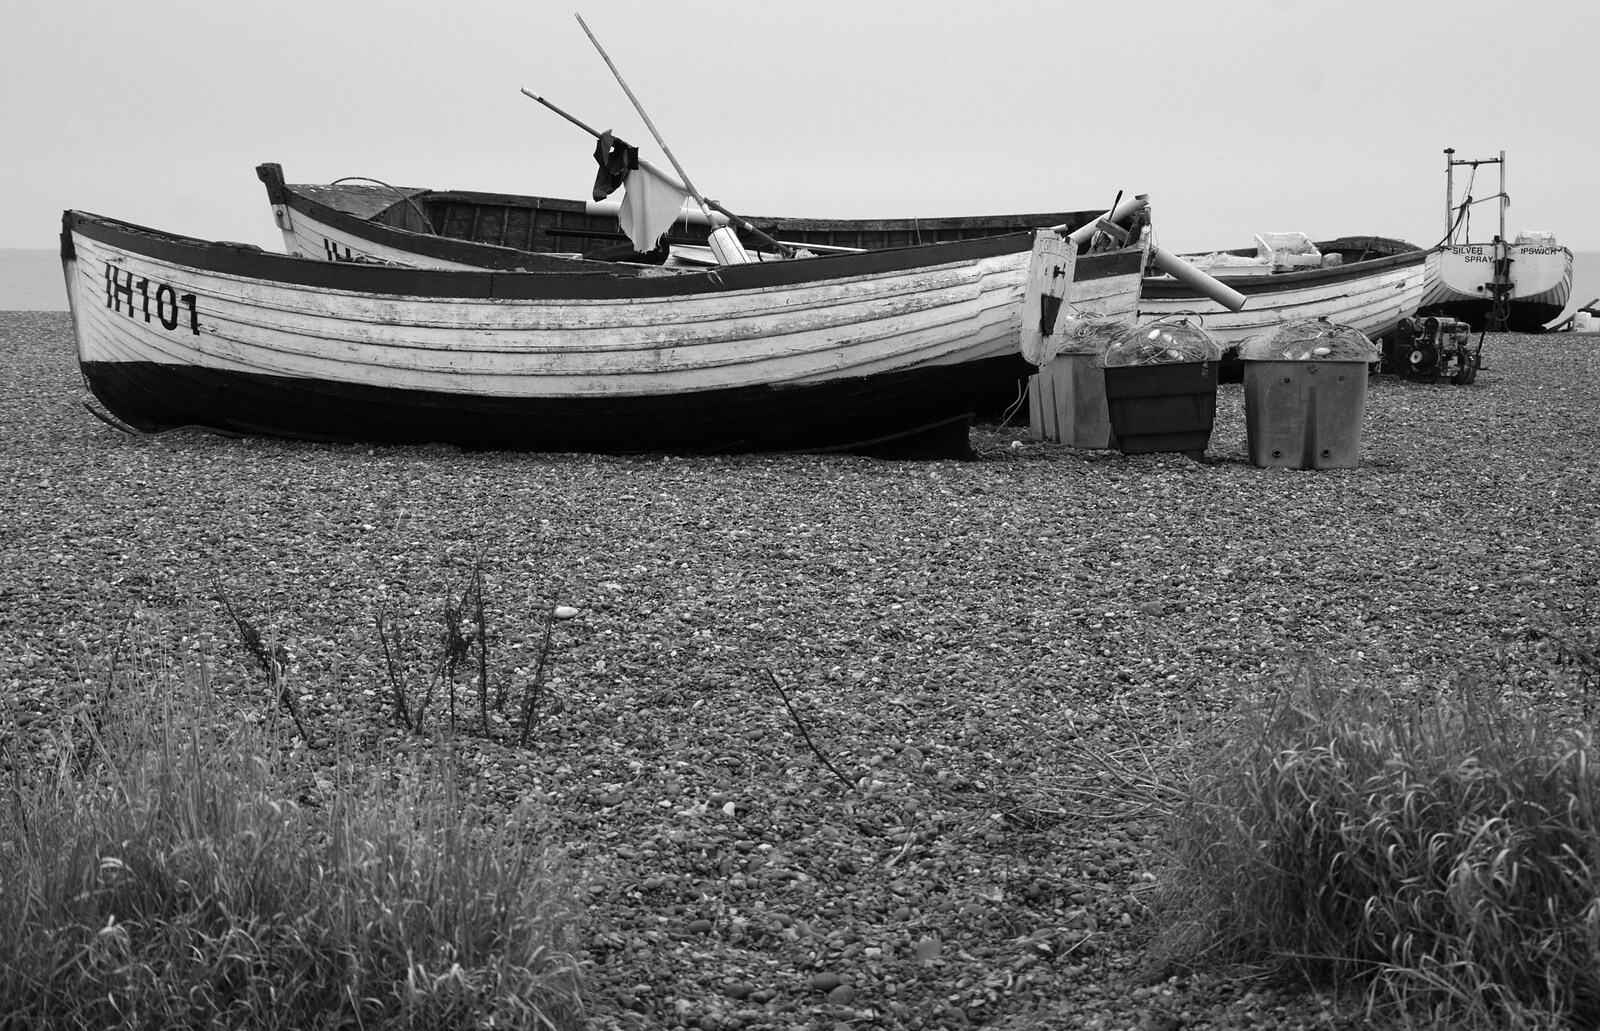 More fishing boats from A Postcard from Aldeburgh, Suffolk - 6th January 2019